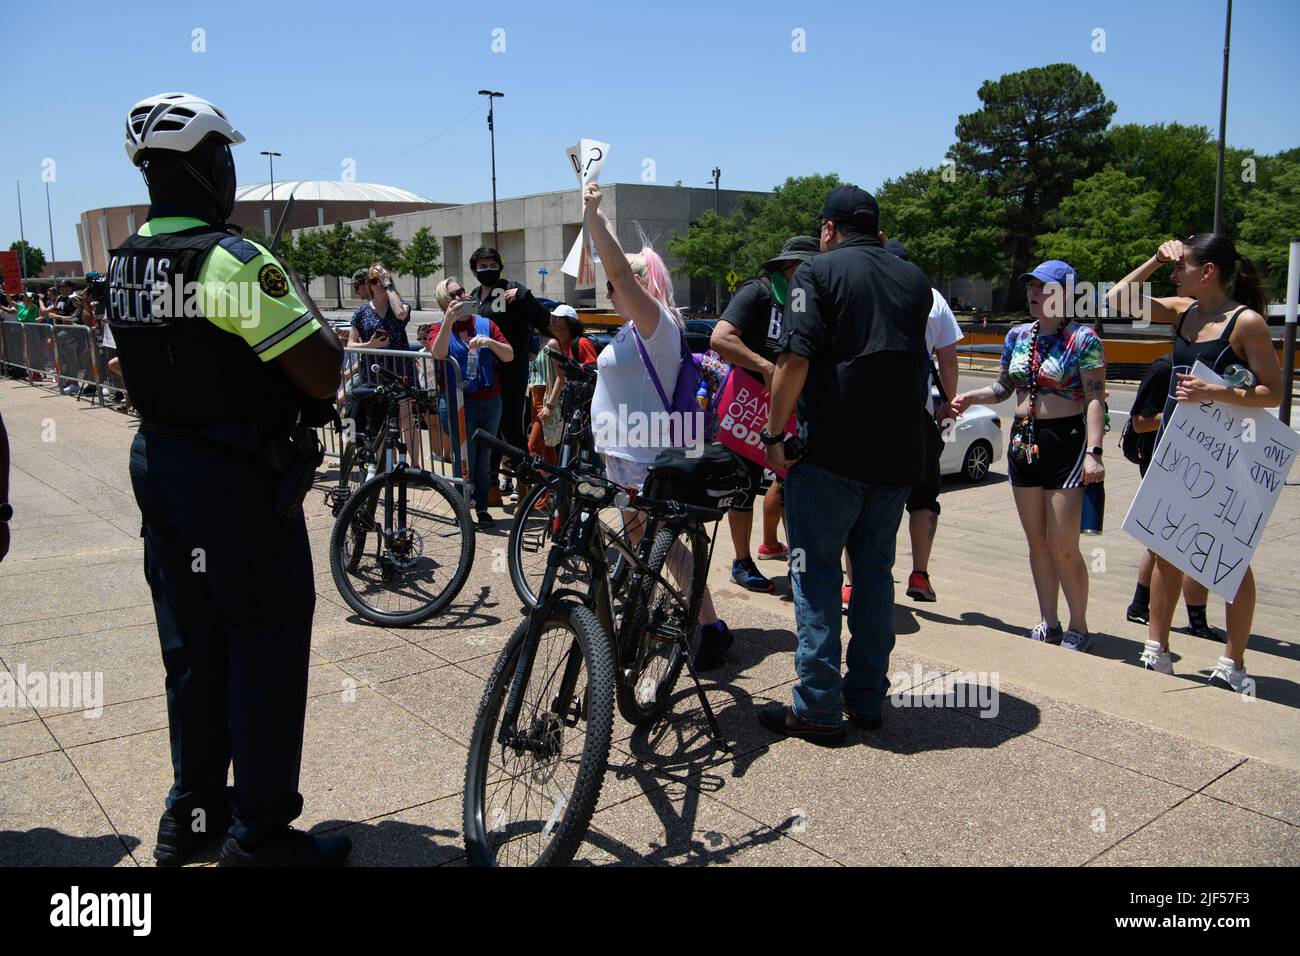 June 29, 2022, Dallas City Hall, Dallas, Texas: During the Dallas Reproductive Rights Rally at Dallas City Hall, several anti-abortion protesters started to harass the event participants. Dallas Police Dept. officers moved the protesters to a fenced area near the plaza's flagpoles, and bicycle cops blocked entry.After about 30 minutes of pro-abortion protesters sharing their opinions of religious protesters, the police escorted them off the plaza.Participants started to follow them out, and eventually started their march through downtown Dallas starting at AT&T's Discovery Plaza. (Credit Stock Photo